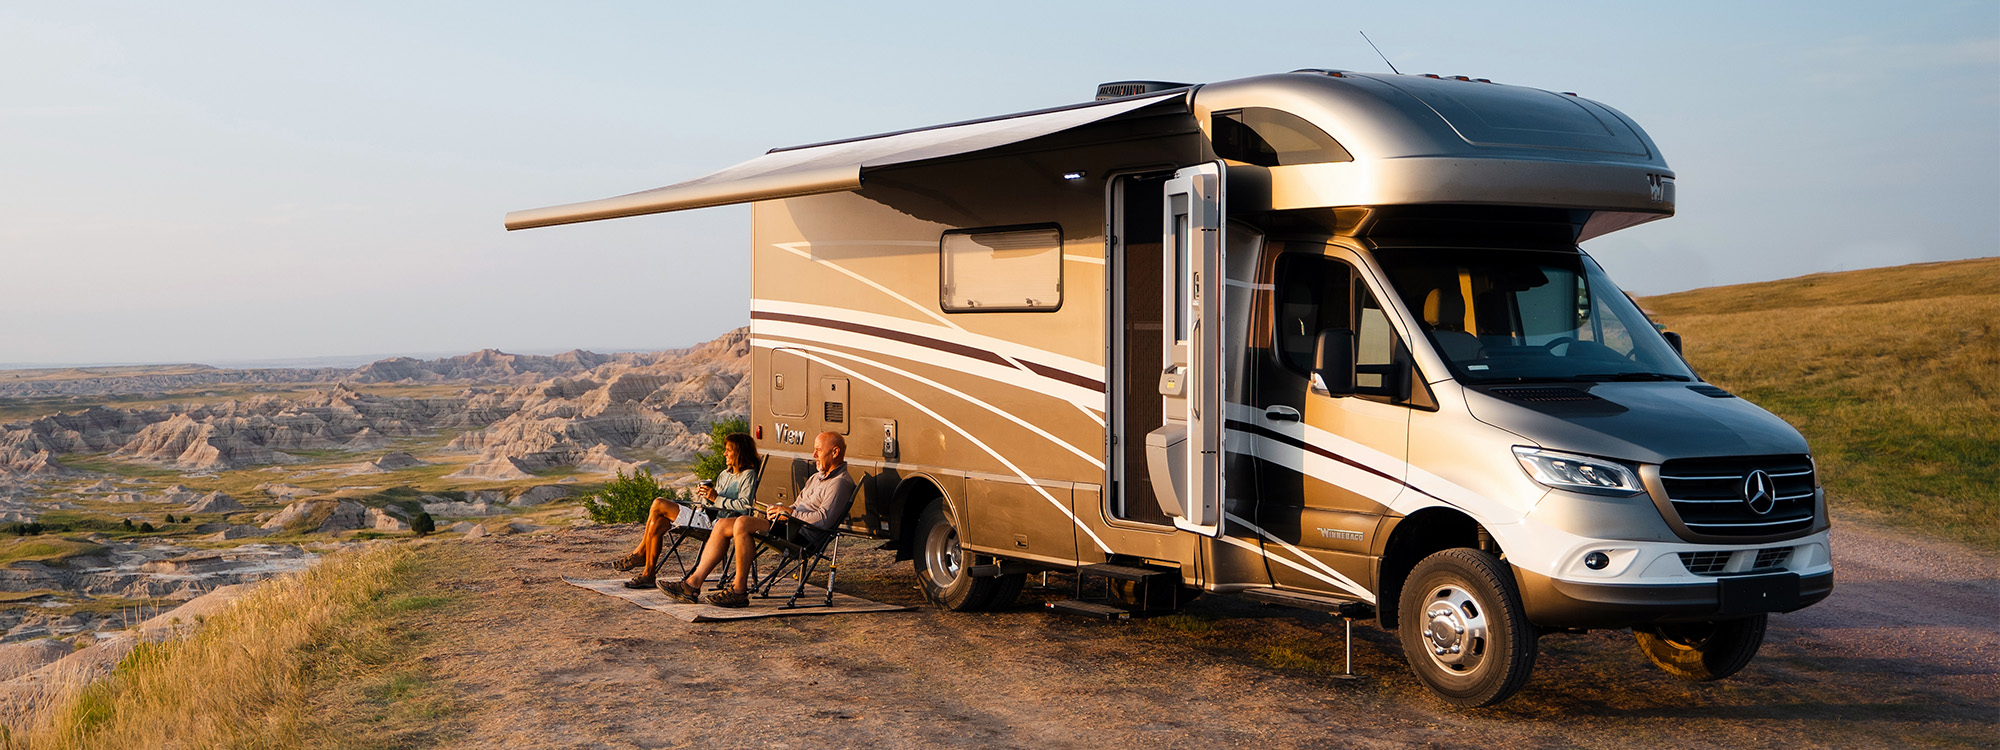 https://www.winnebago.com/Admin/Public/GetImage.ashx?Width=2000&Height=750&Crop=7&Format=WebP&DoNotUpscale=False&FillCanvas=True&Image=/Files/Images/Winnebago/Products/2022/View/VPL-and-WGO/Hero-Thumb-Matterport/View-23-2.jpg&altFmImage_path=/Files/Images/placeholder.gif